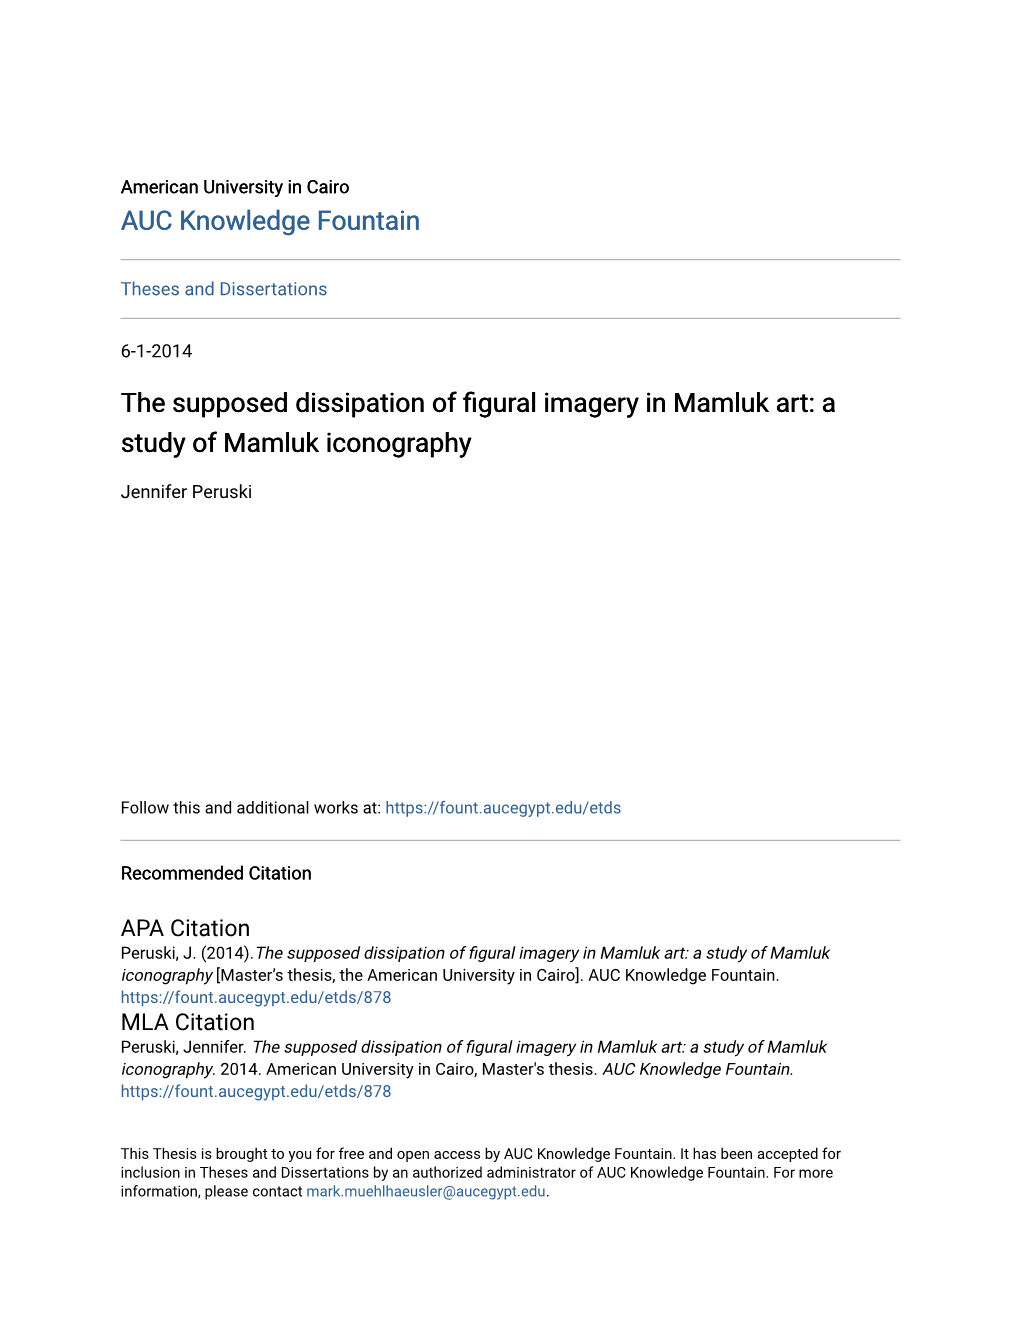 The Supposed Dissipation of Figural Imagery in Mamluk Art: a Study of Mamluk Iconography